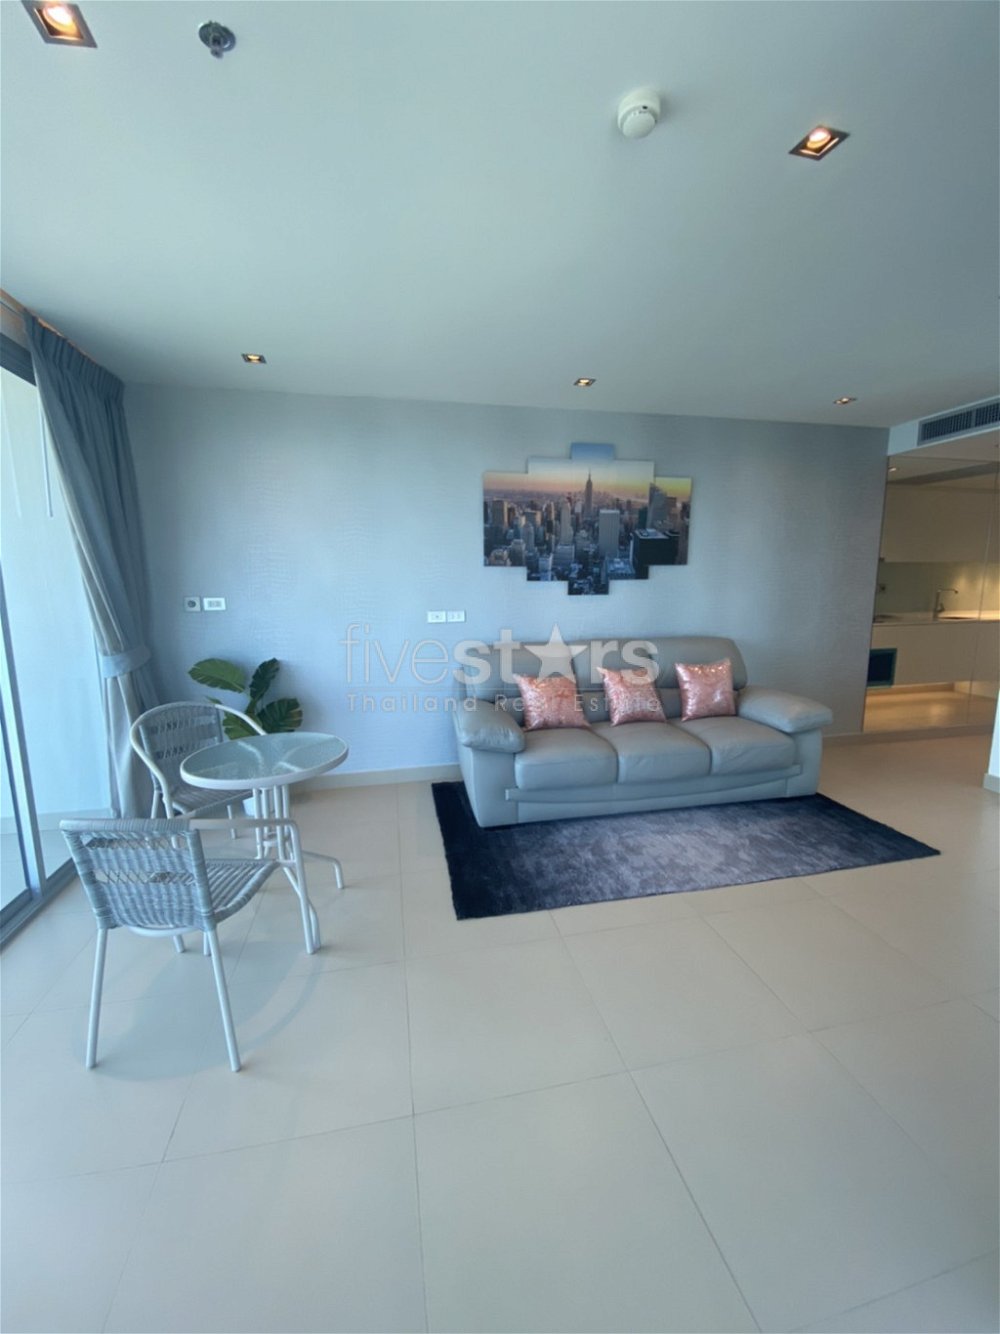 Large 1 bedroom condo for sale at Pattaya 1970454375